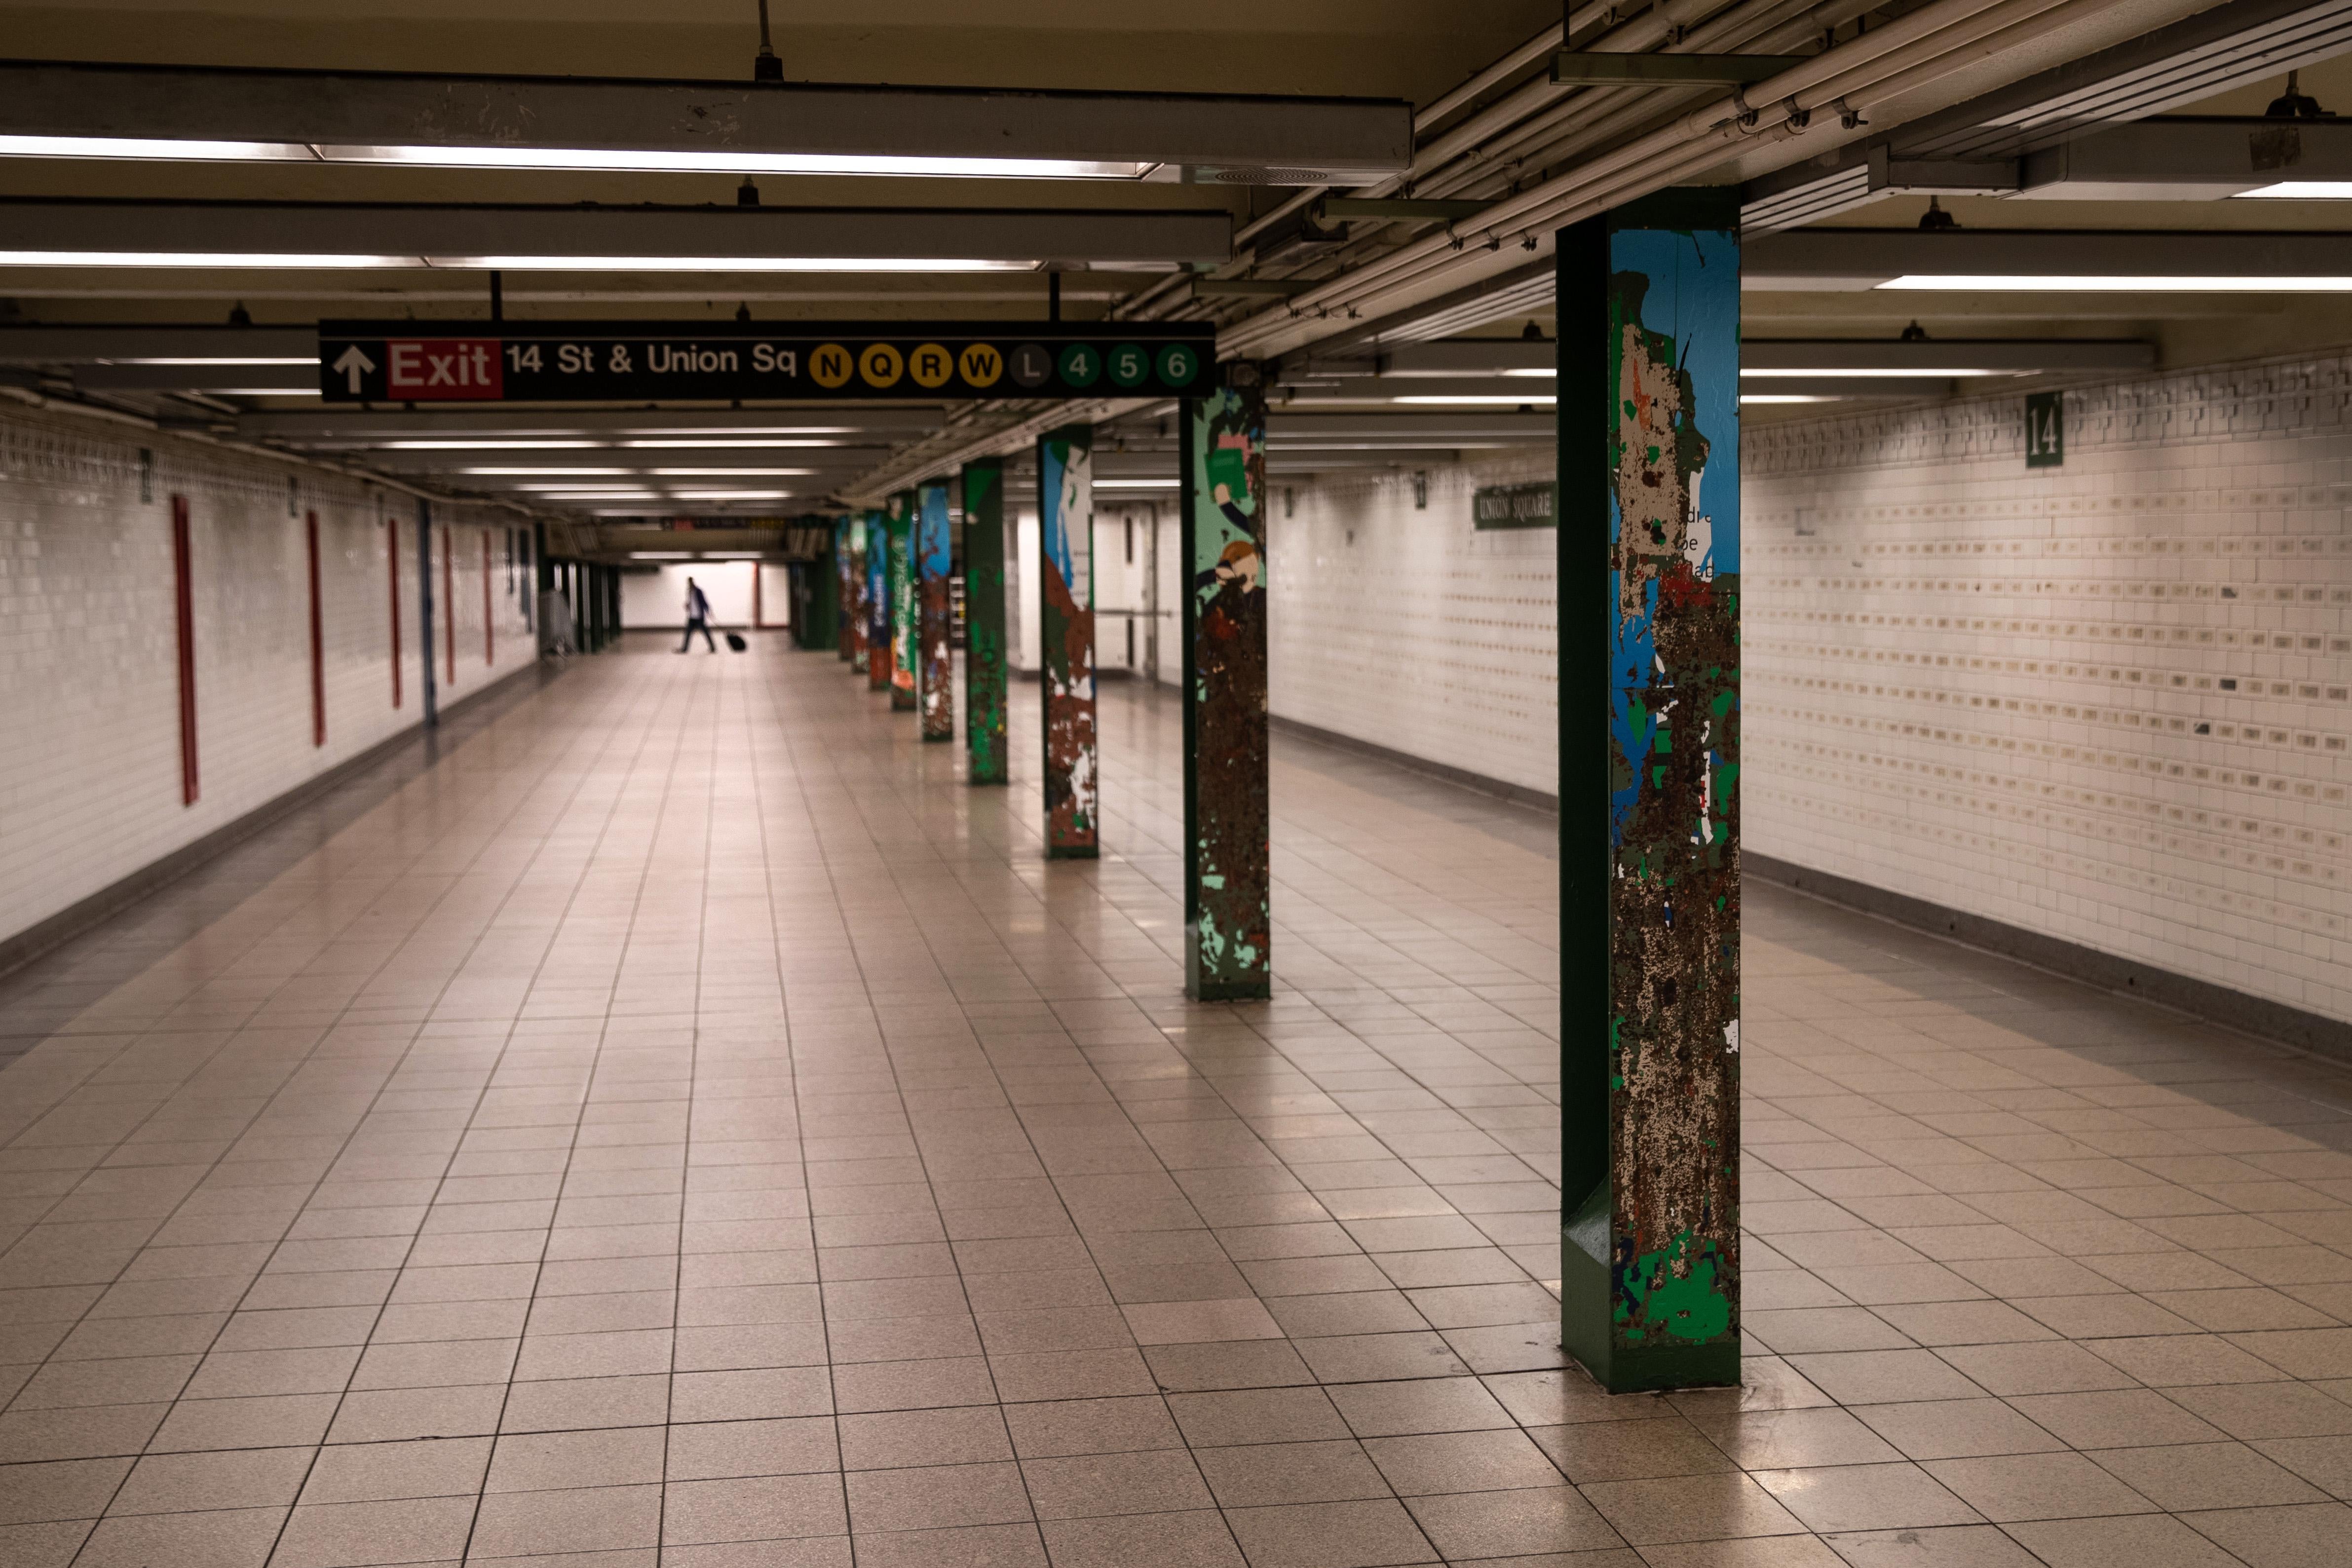 A subway station sits virtually empty at Union Square in Manhattan on June 01, 2020 in New York City. Amid the coronavirus pandemic, demonstrations rage demanding justice for George Floyd, the unarmed black man who died while in the custody of Minneapolis police on May 25 . (Photo by John Moore/Getty Images)